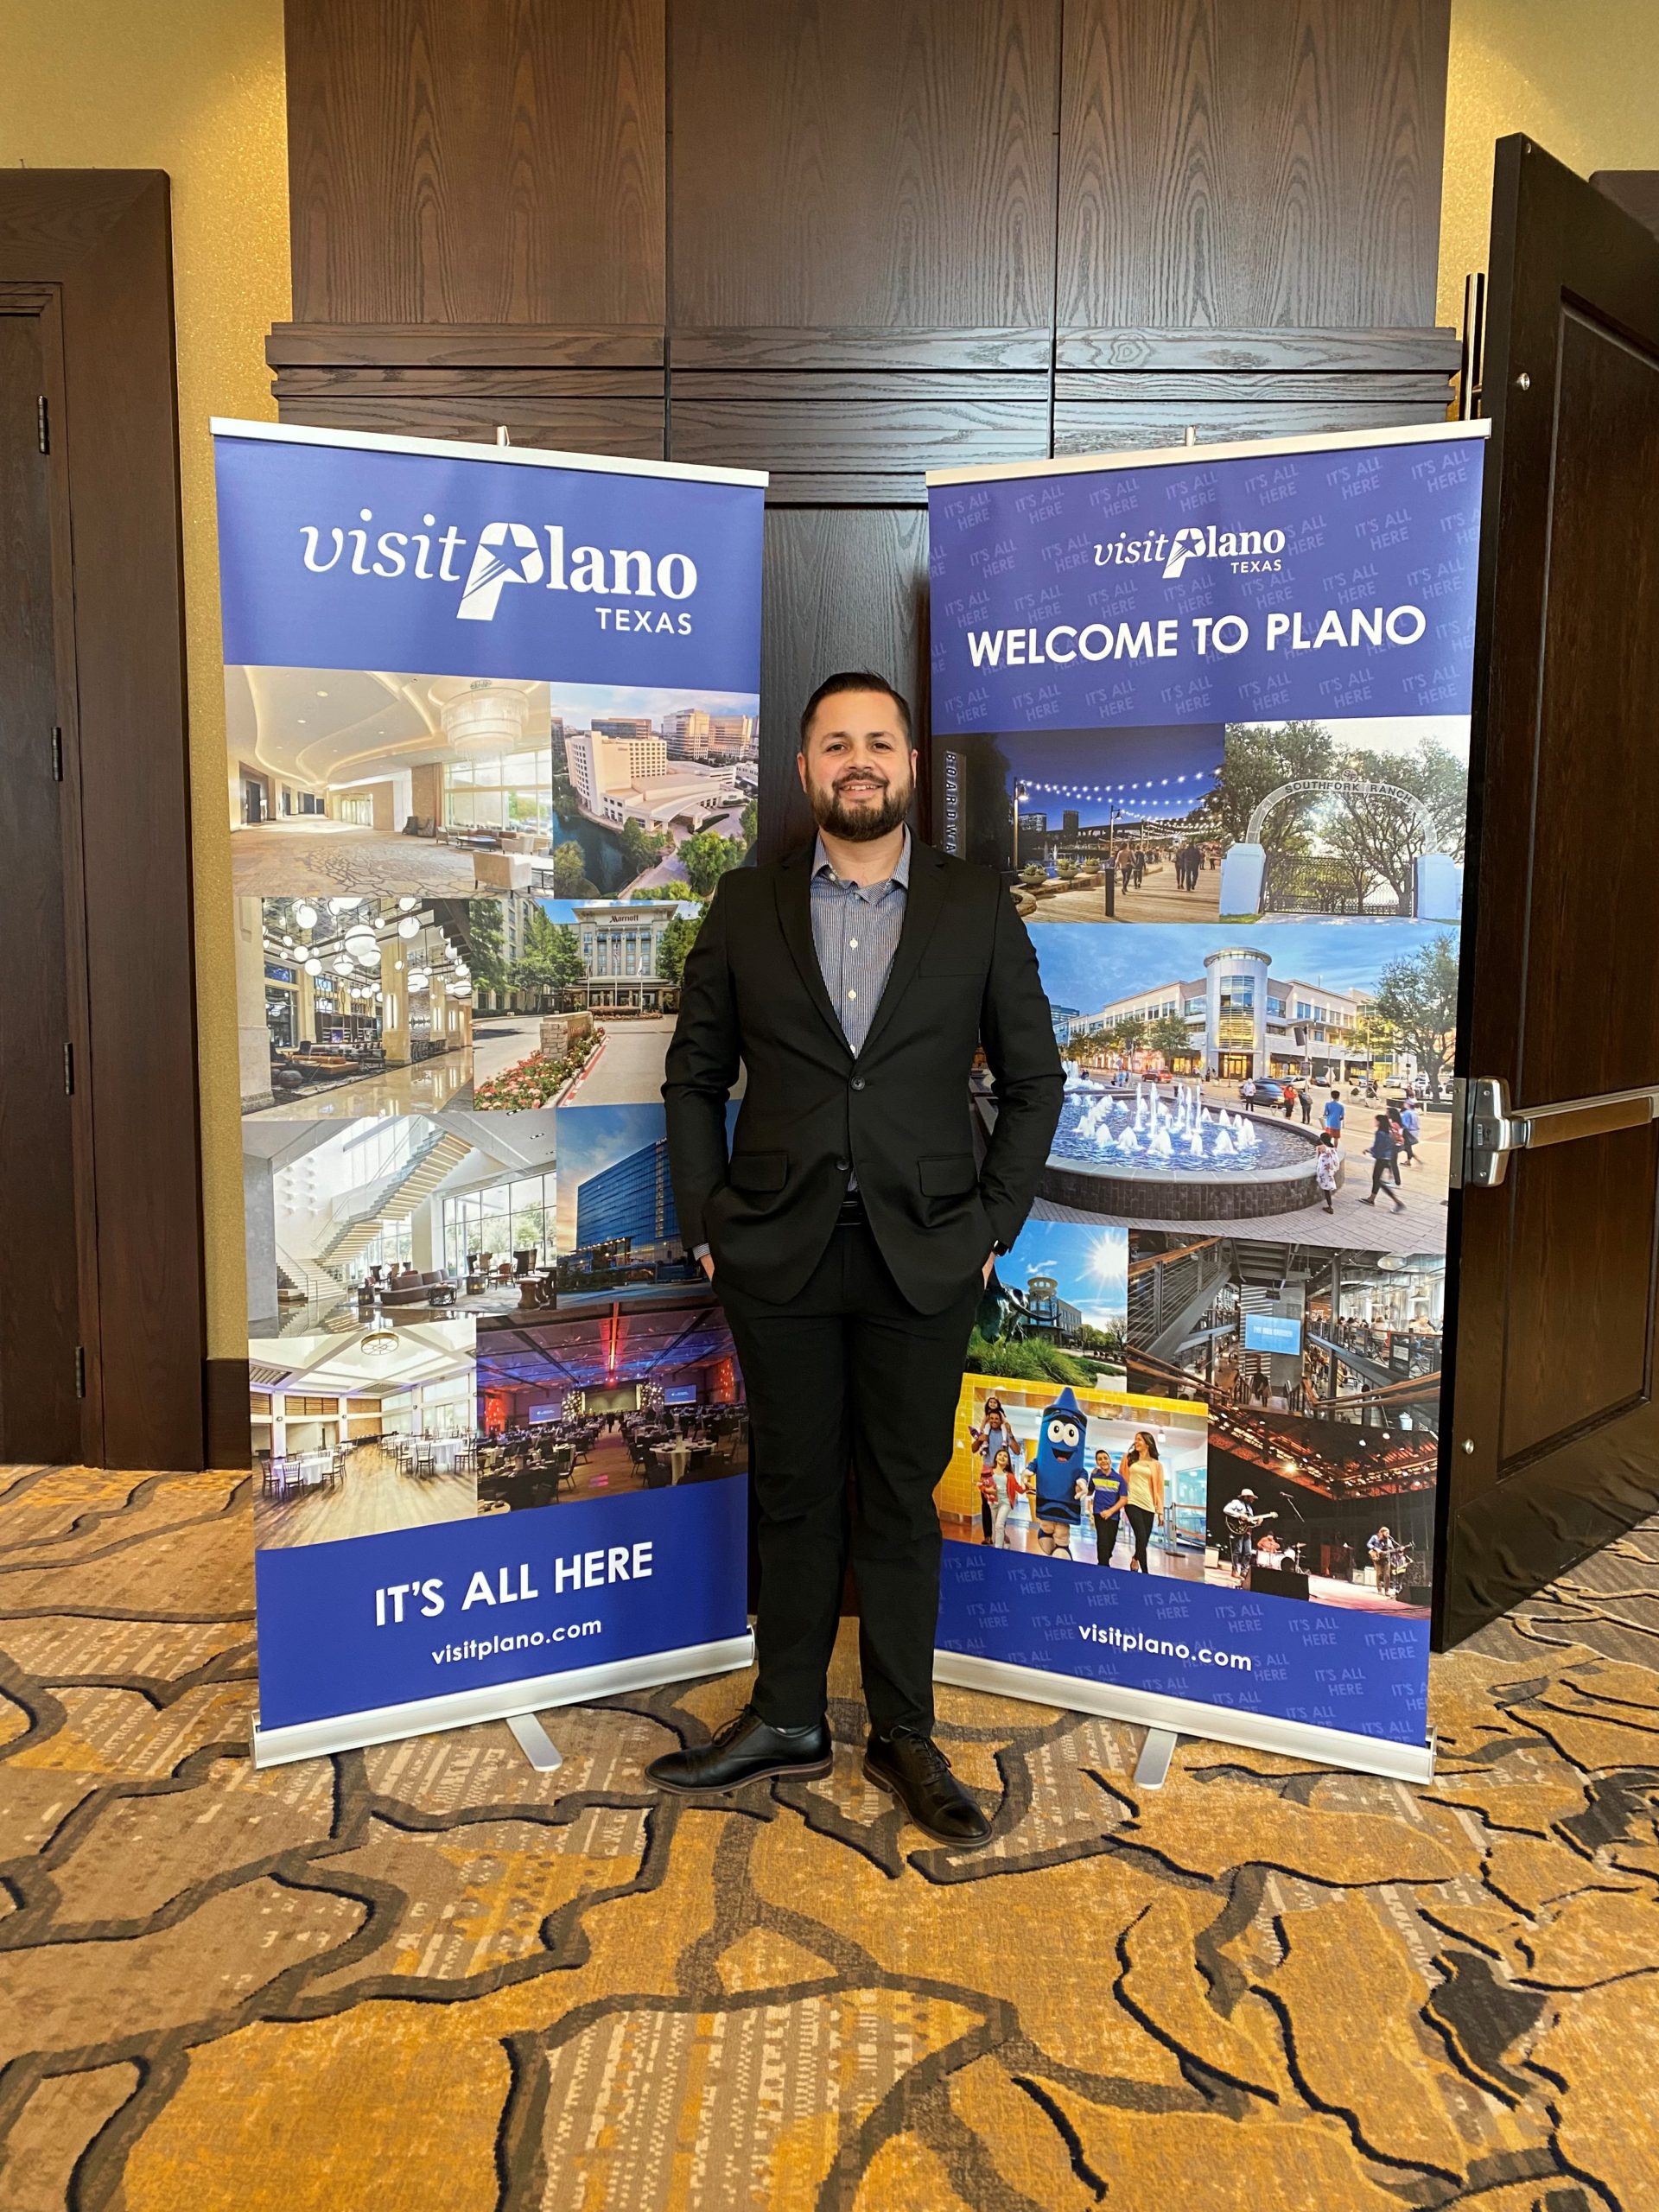 Visit Plano Sales Manager, Steven Simmons, standing in front of Visit Plano's pop-up banners.